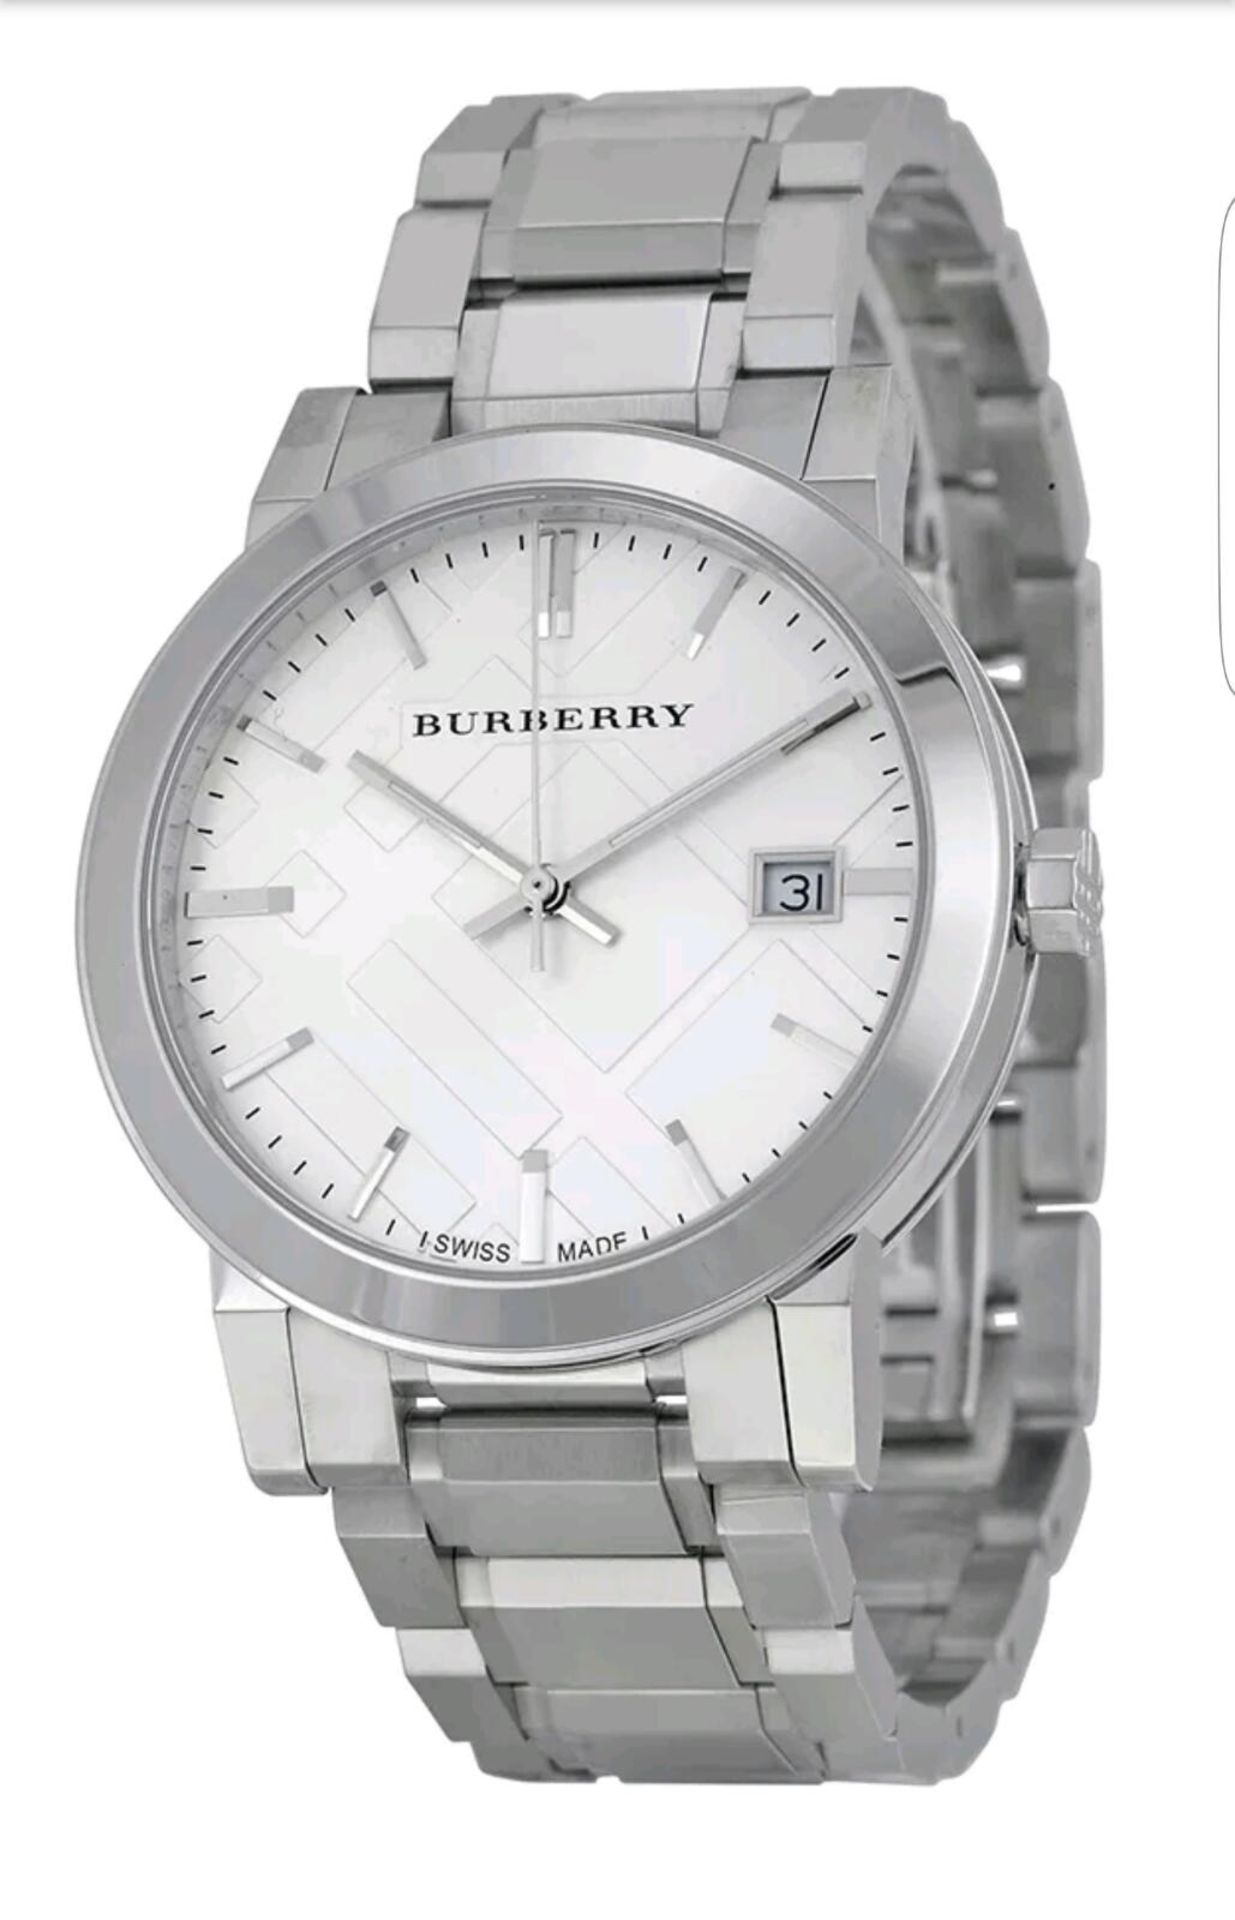 BRAND NEW GENTS BURBERRY WATCH, BU9000, COMPLETE WITH ORIGINAL BOX AND MANUAL - RRP £399